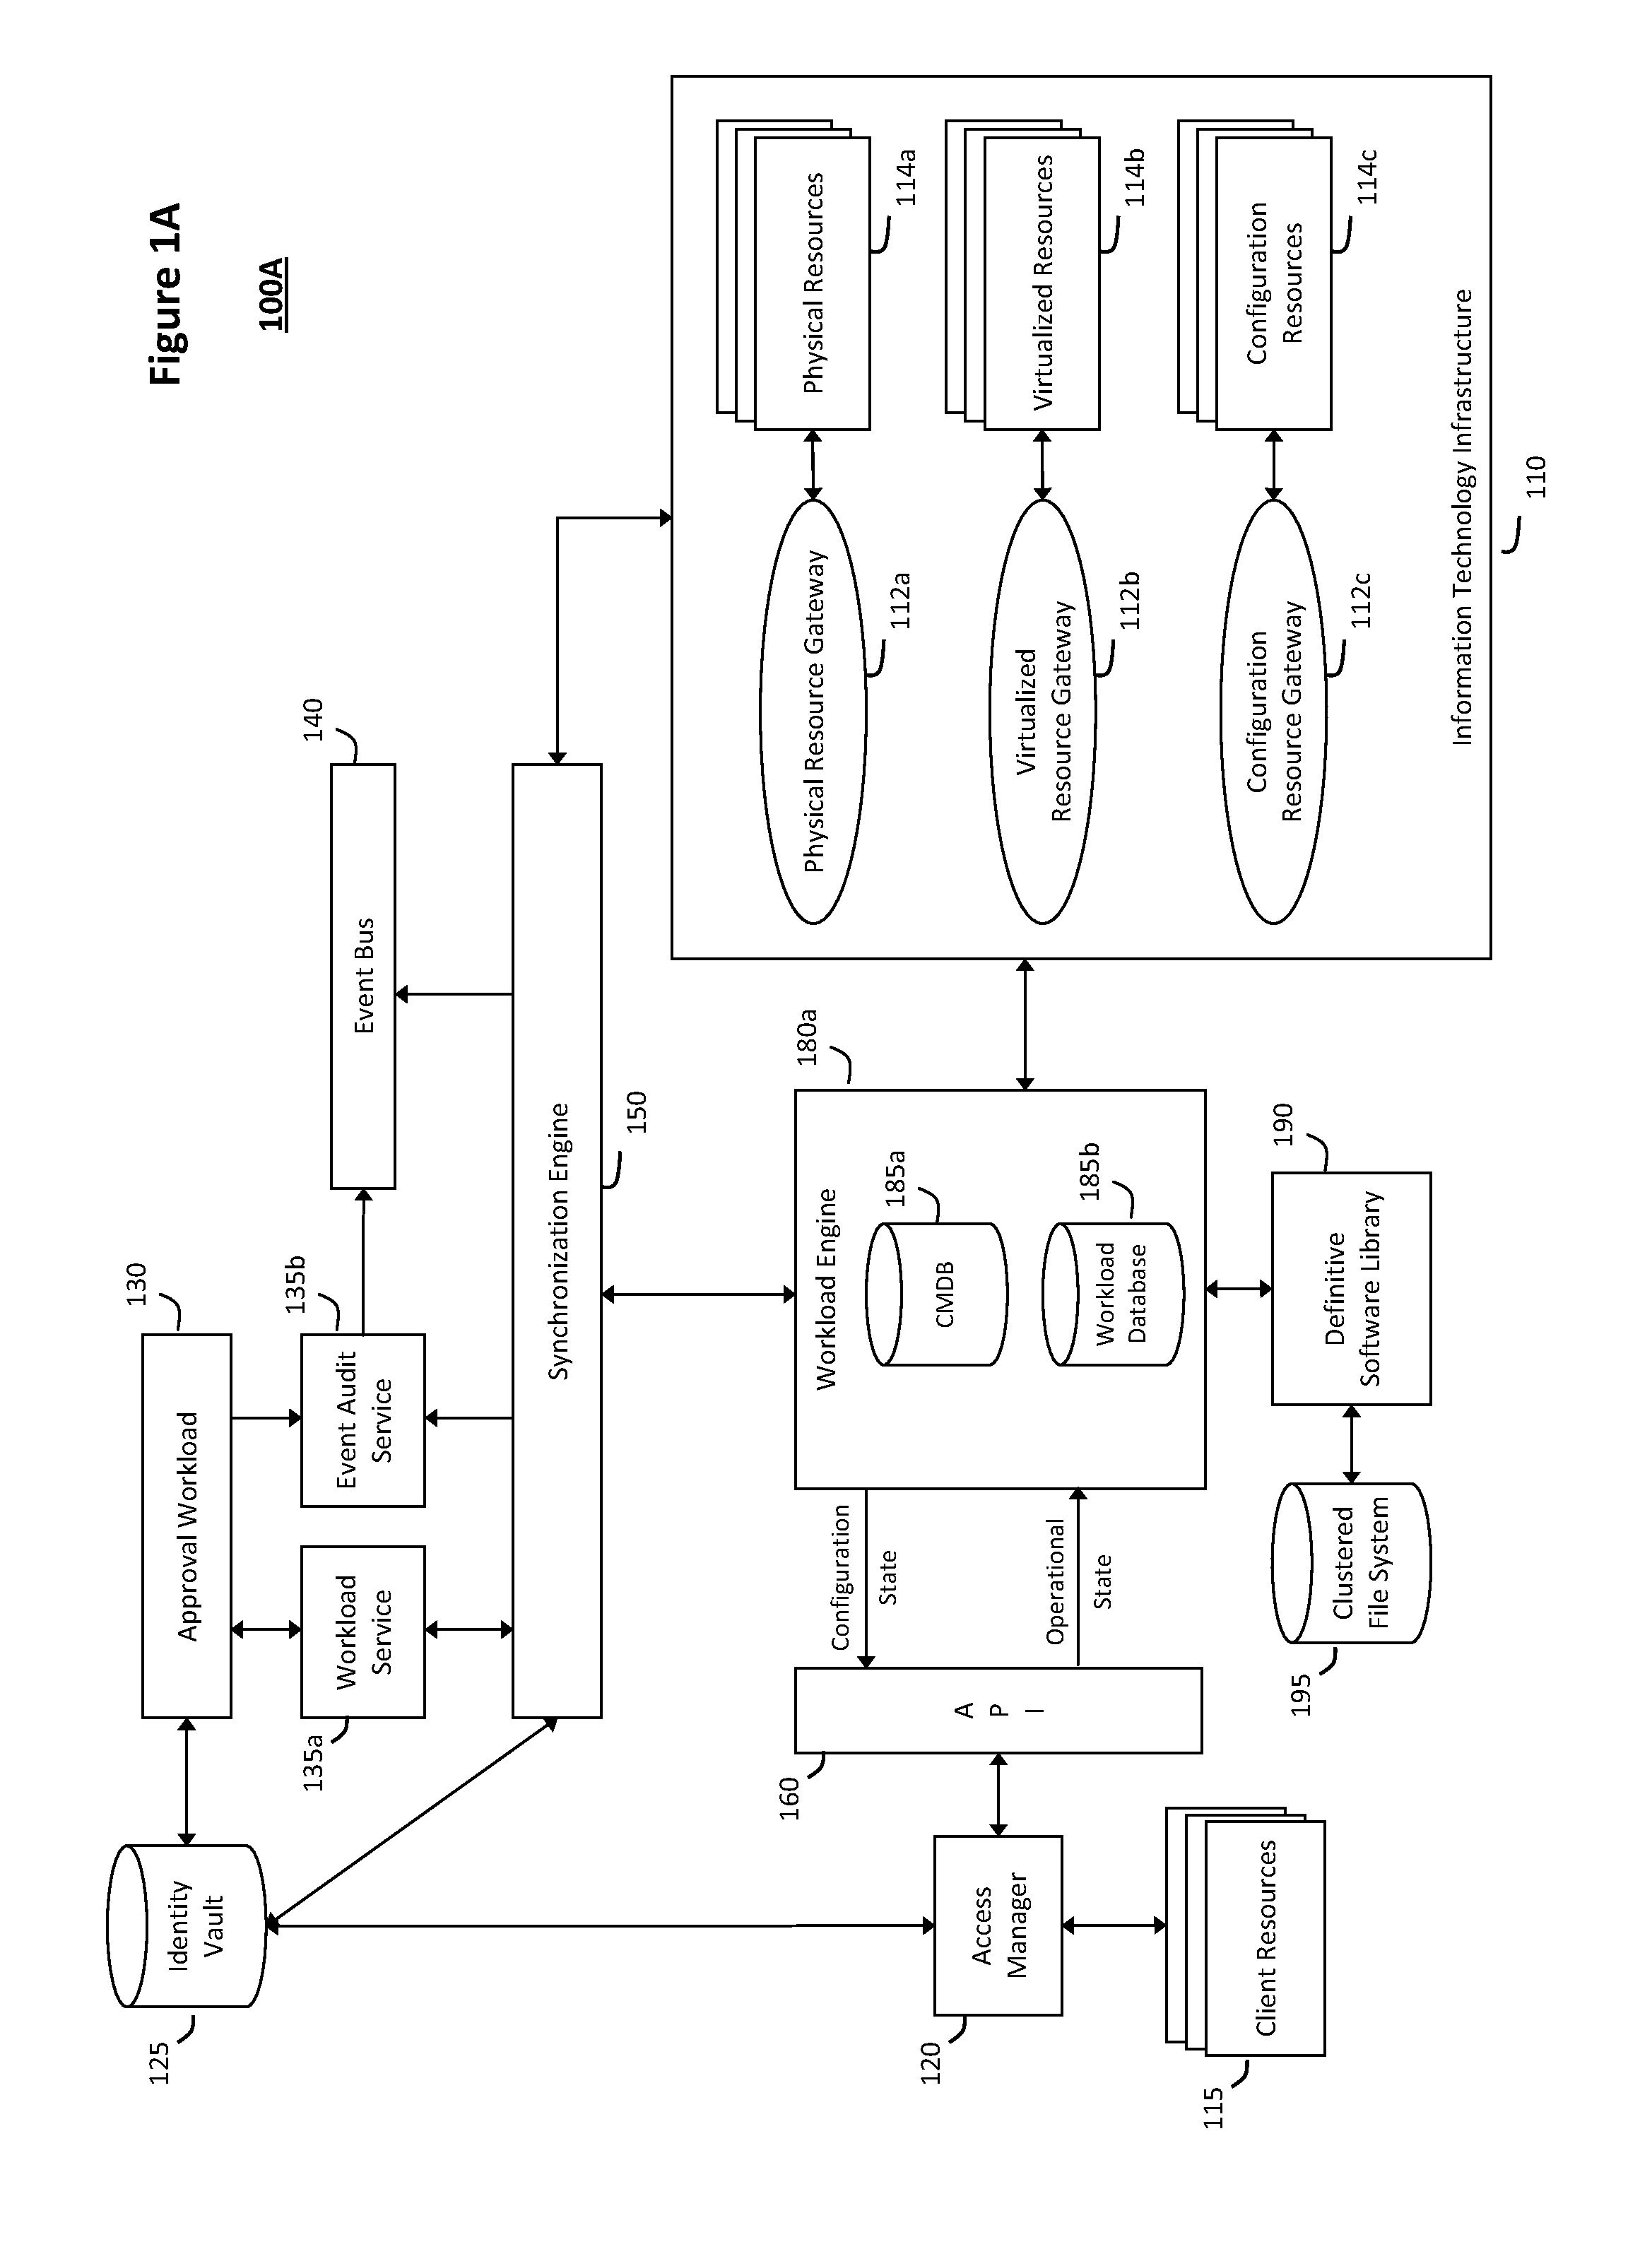 System and method for managing information technology models in an intelligent workload management system